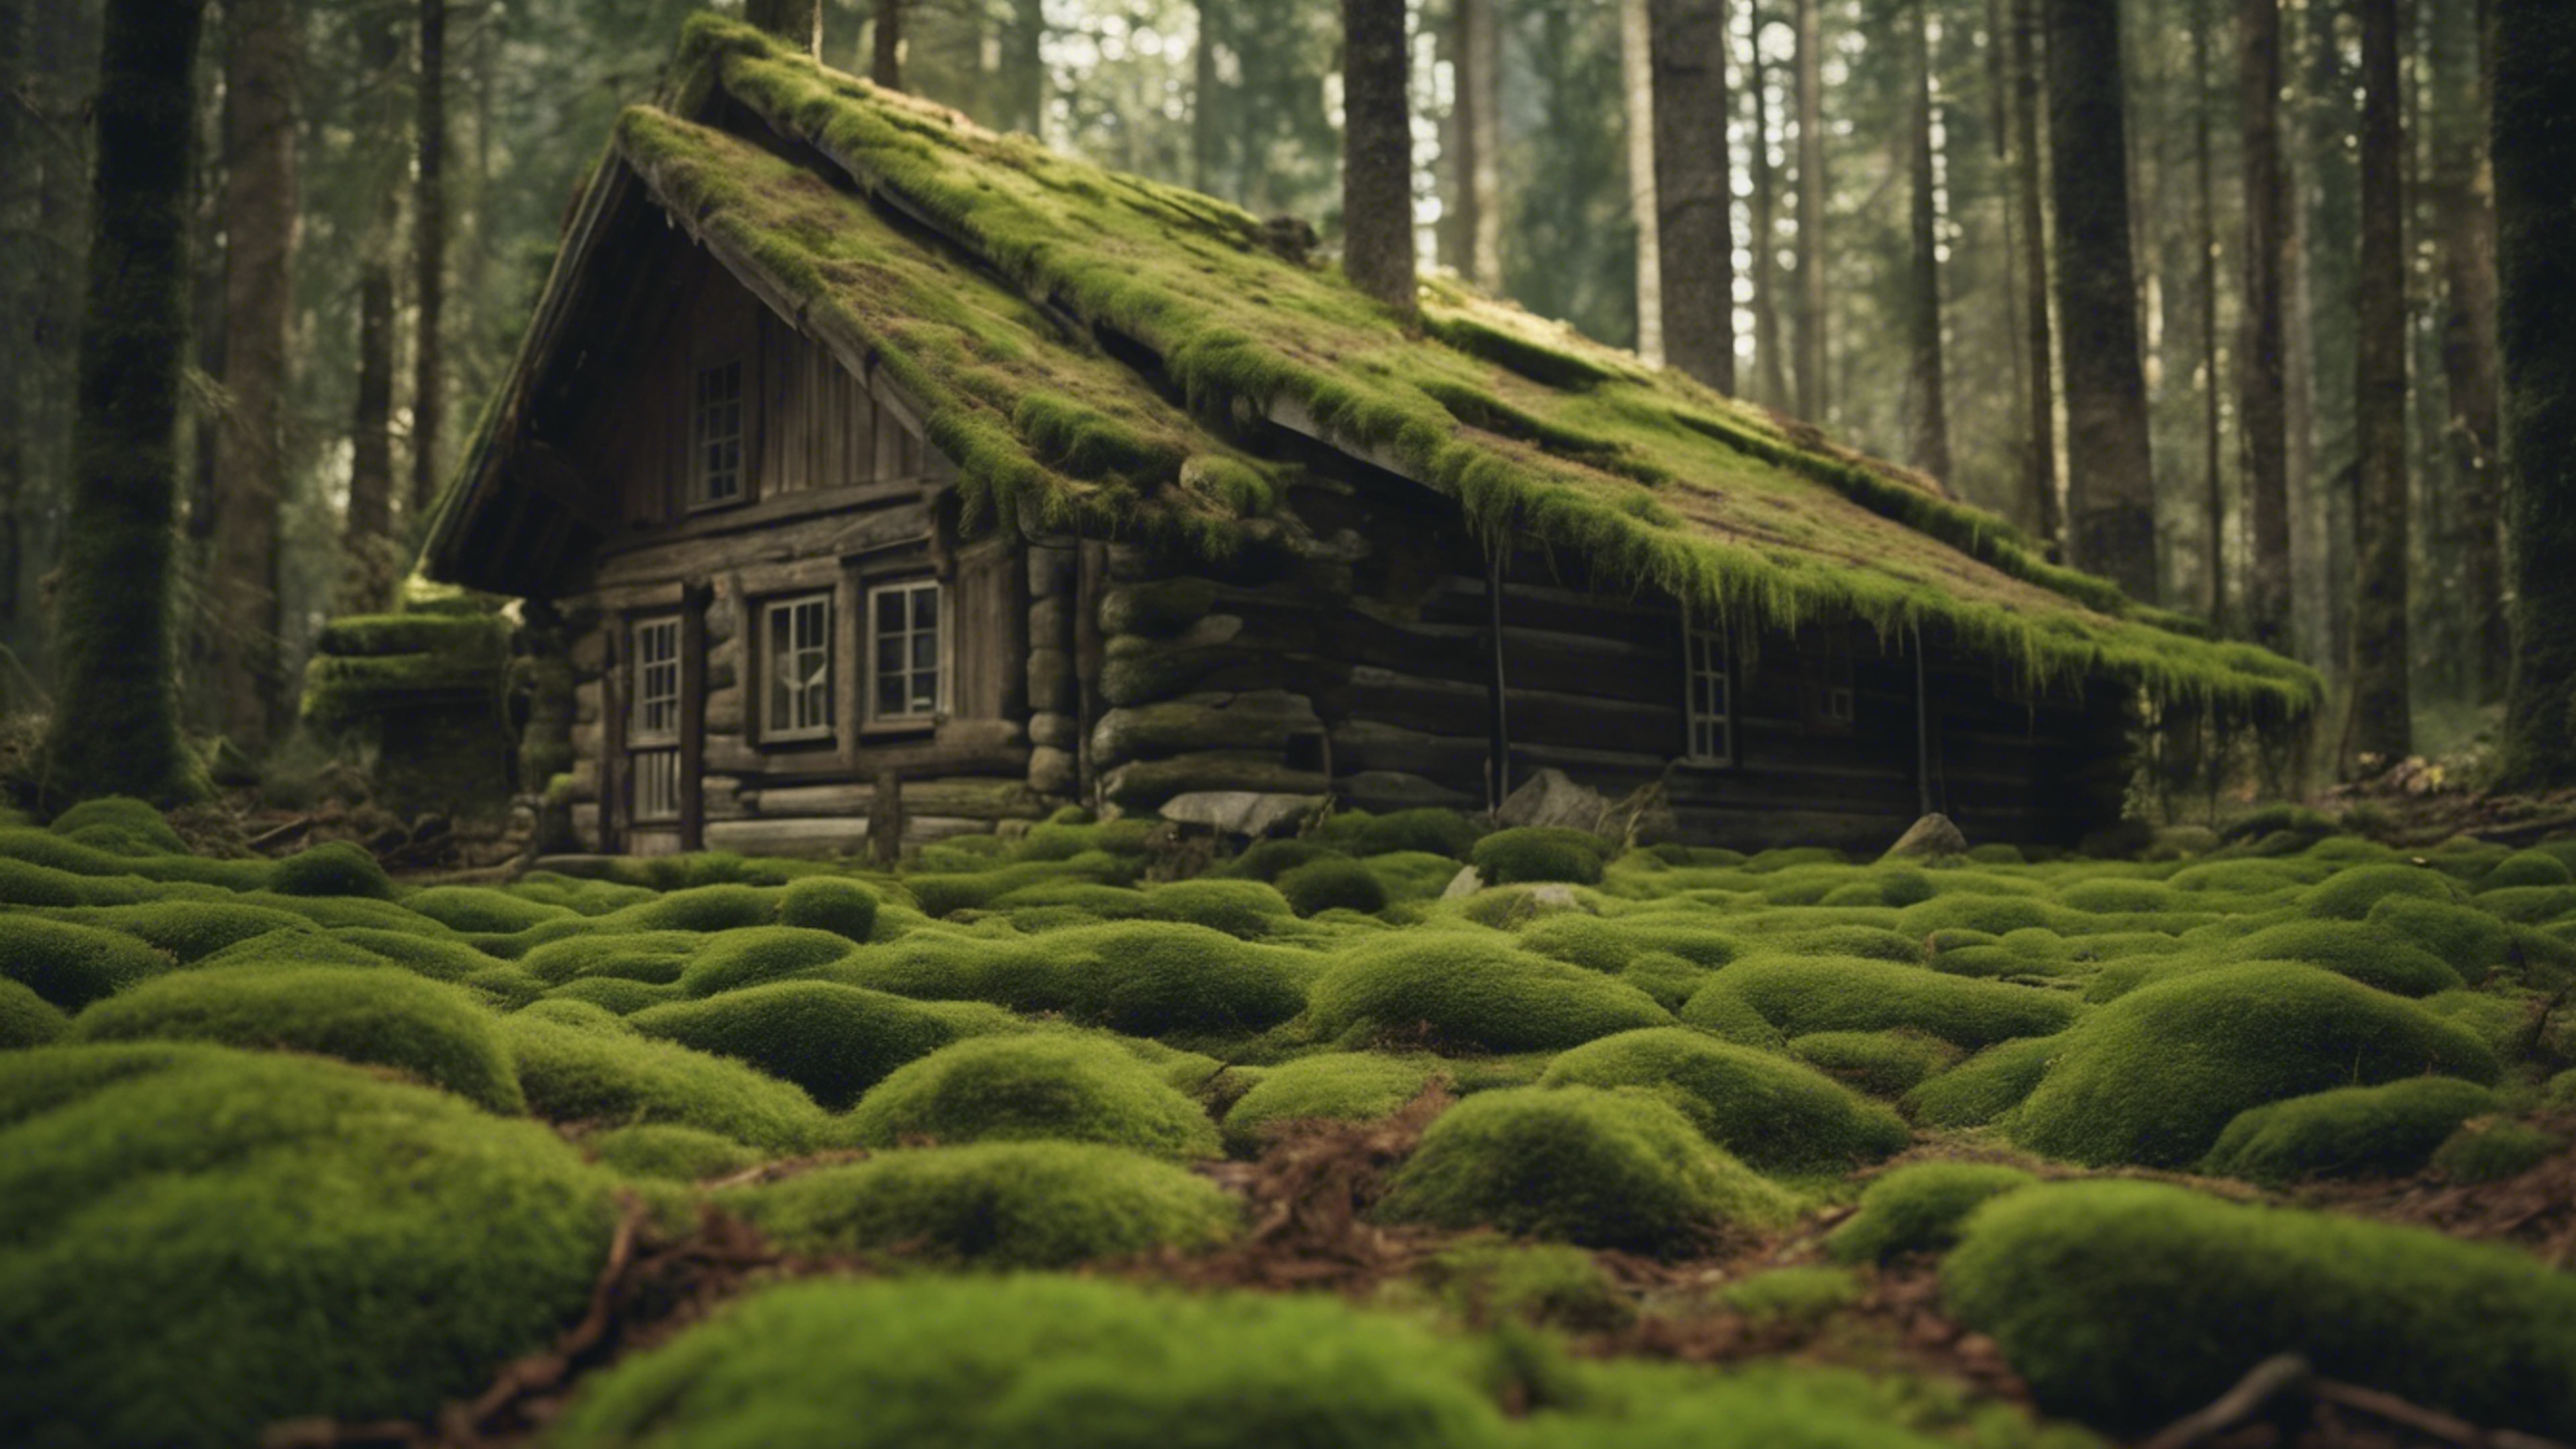 Ancient green moss covering a forgotten, brown wooden cabin in the depths of a forest.壁紙[10c6793935ca4f8ea684]